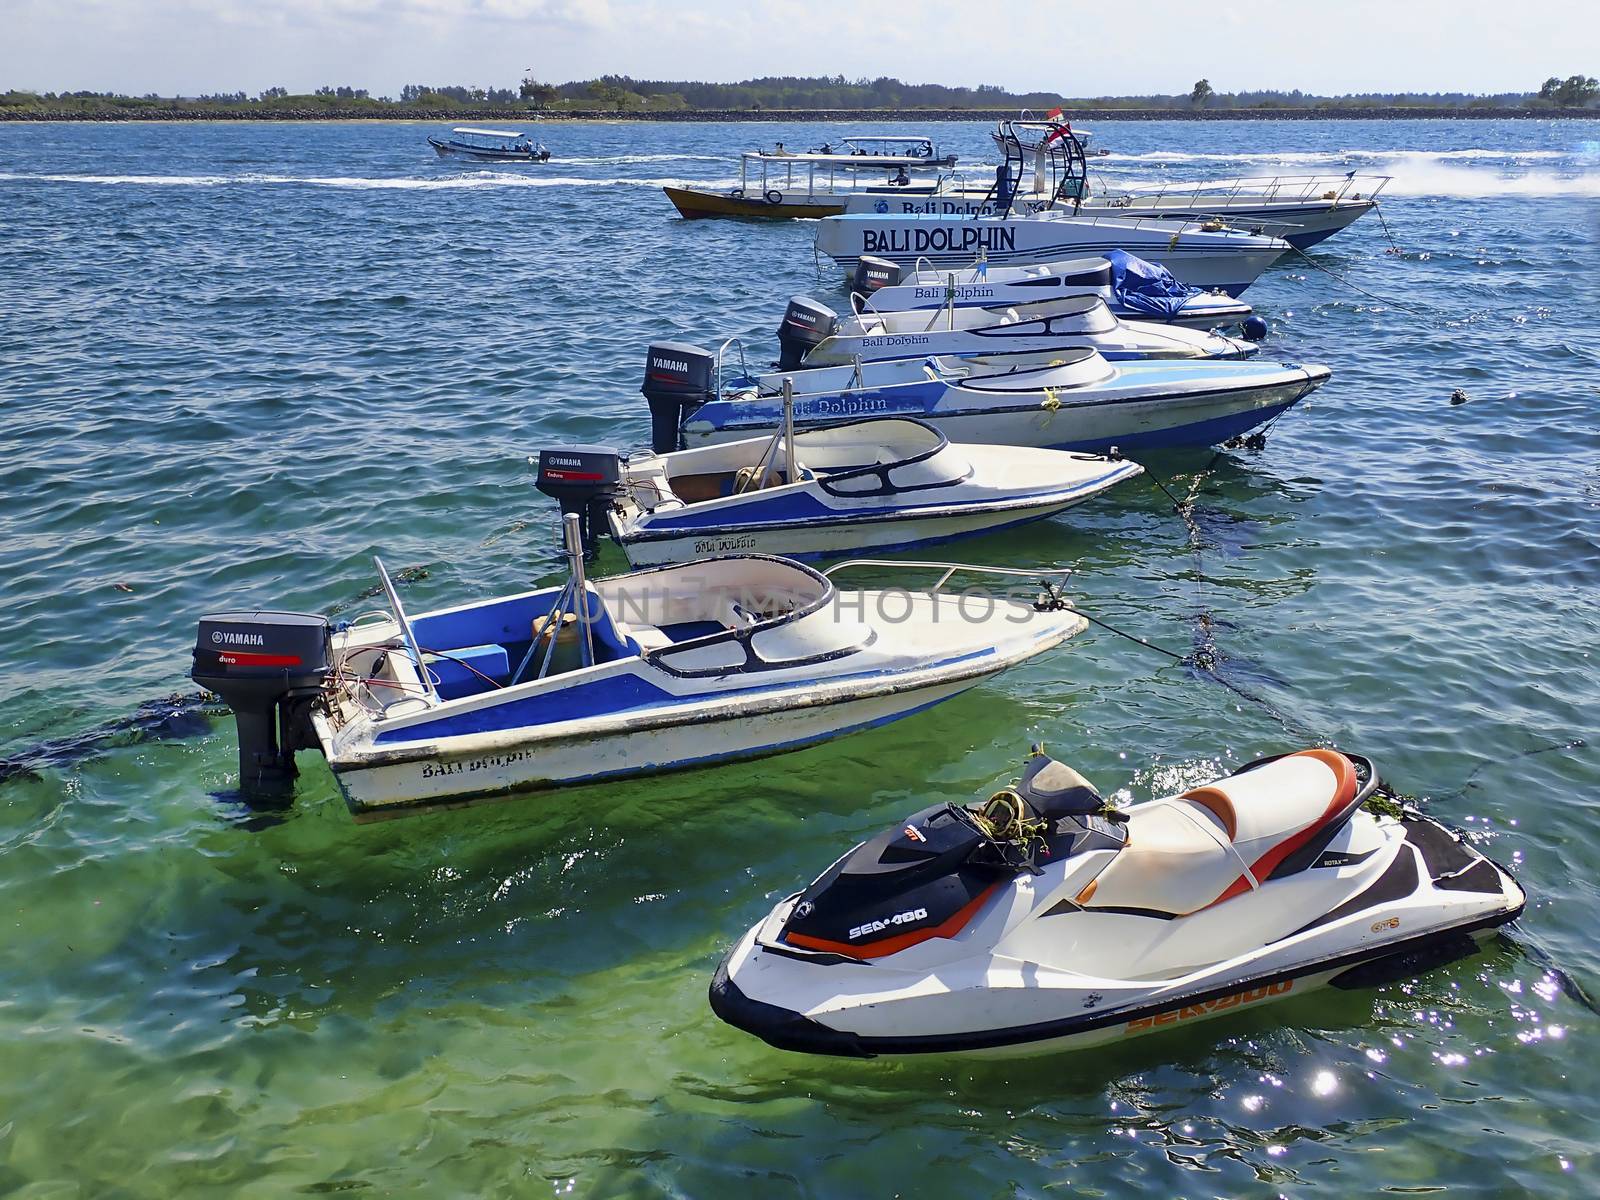 Bali, Indonesia - July 11, 2020 : Bali Water sports vehicle and tourism package in Indonesia